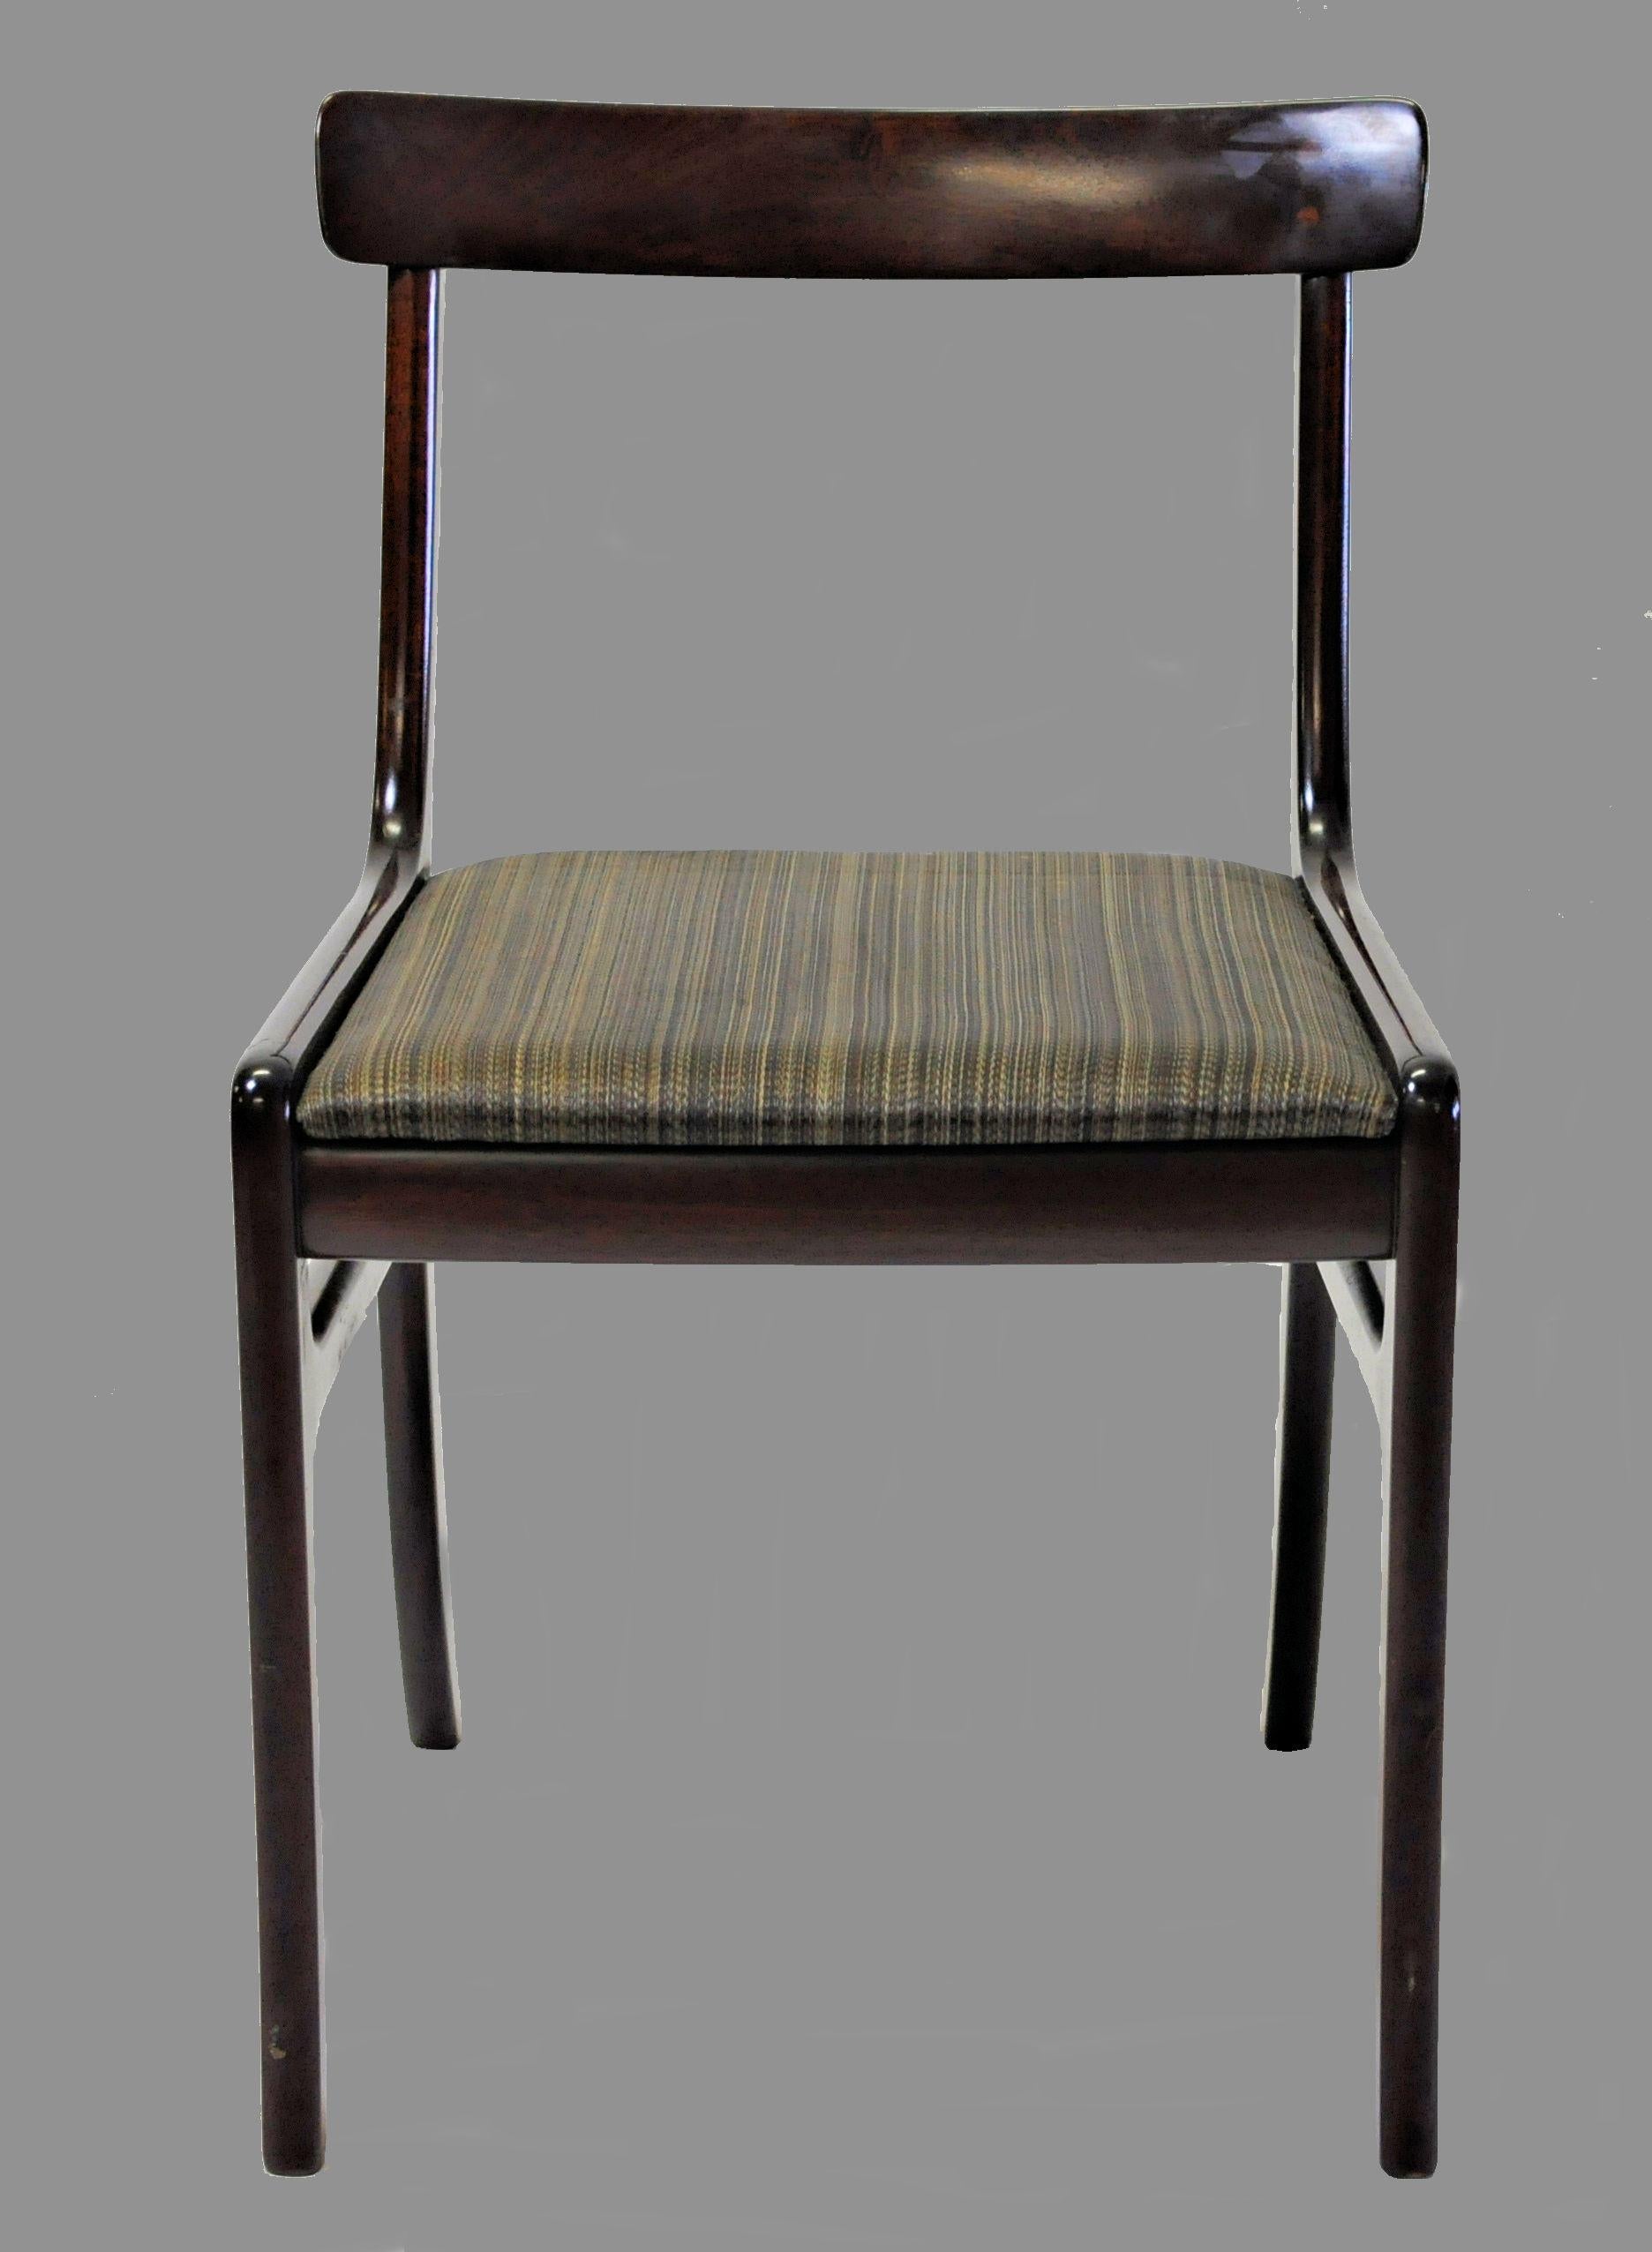 This set of 12 mahogany Rungstedlund dining chairs designed by Ole Wanscher were produced during the 1960s and 1970s by Poul Jeppesen Furniture. 

The dining chairs are part of the Rungstedlund dining furniture series designed by Ole Wanscher and